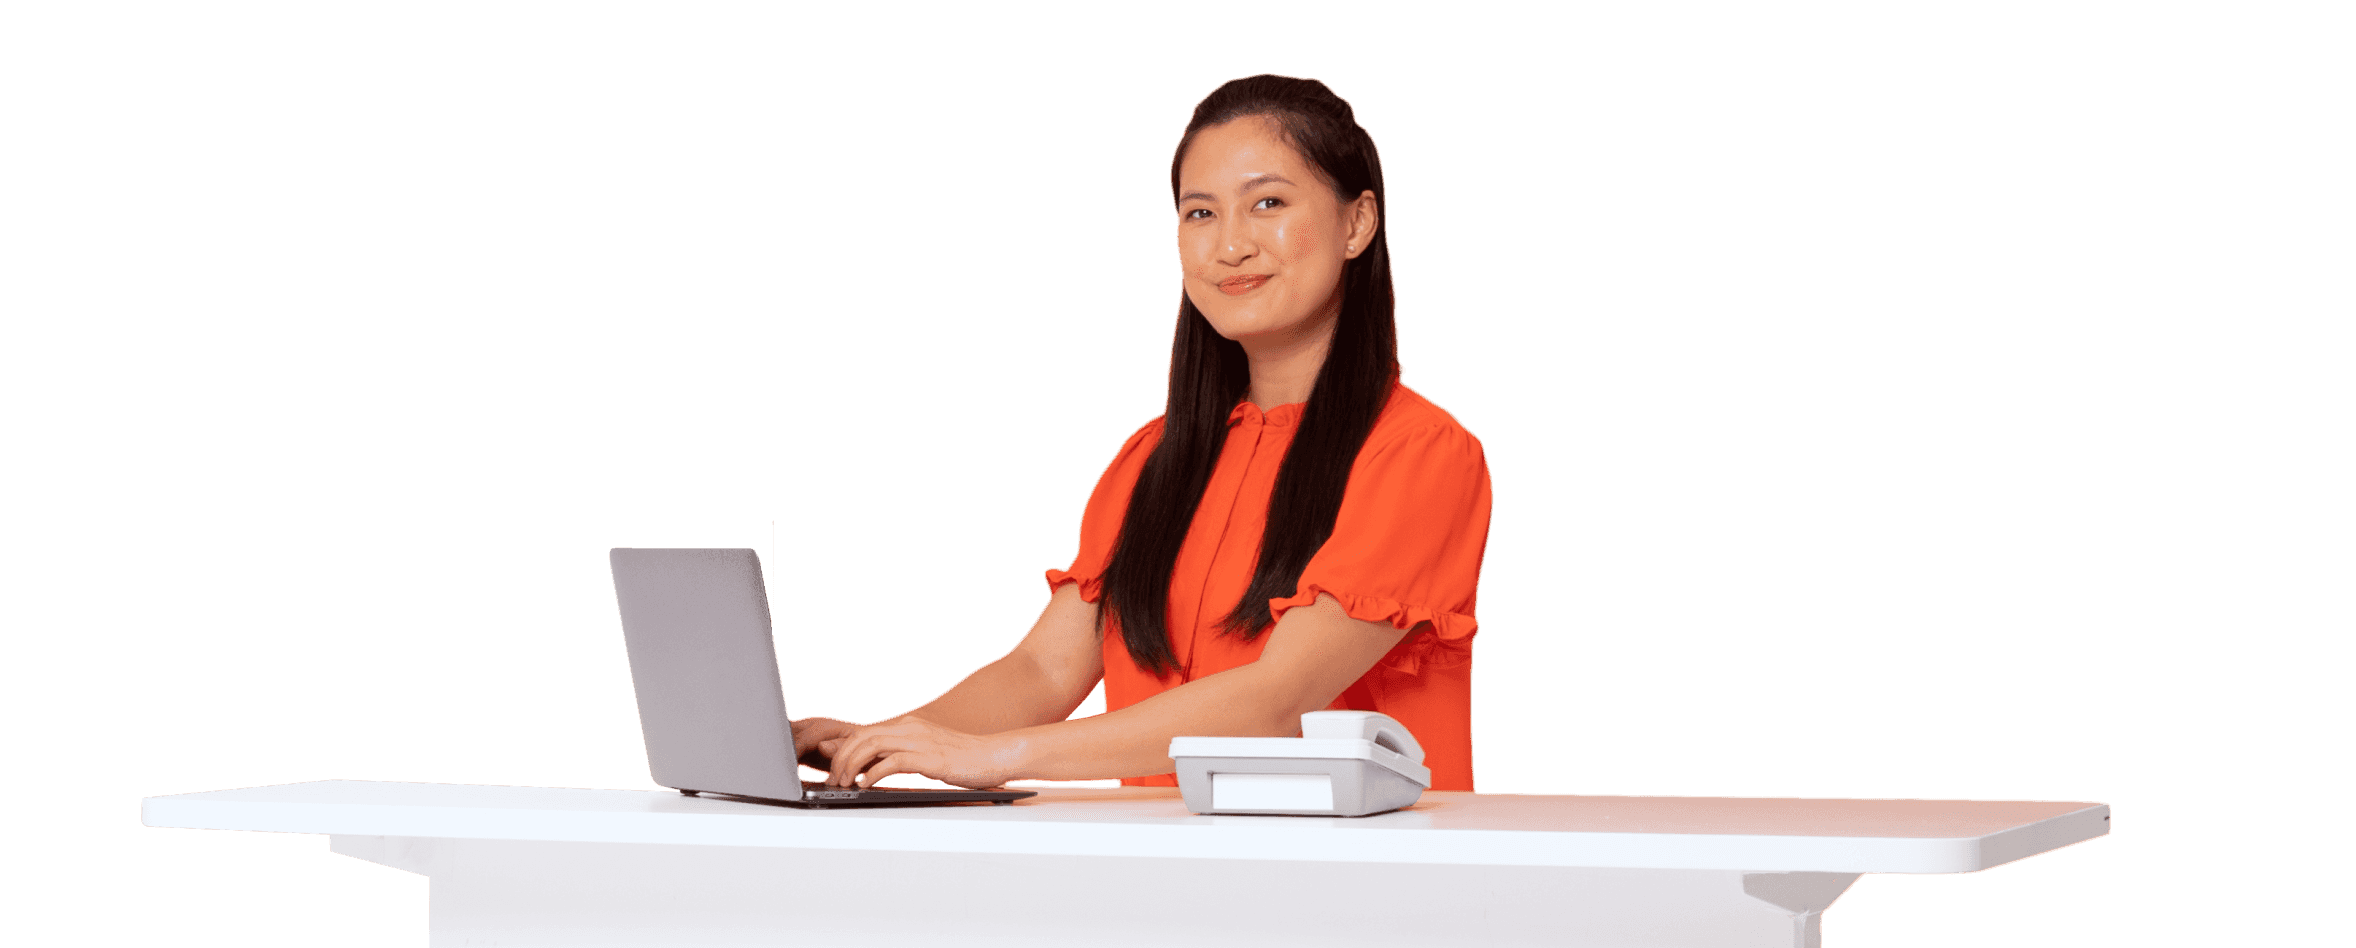 A woman typing on her laptop while smiling